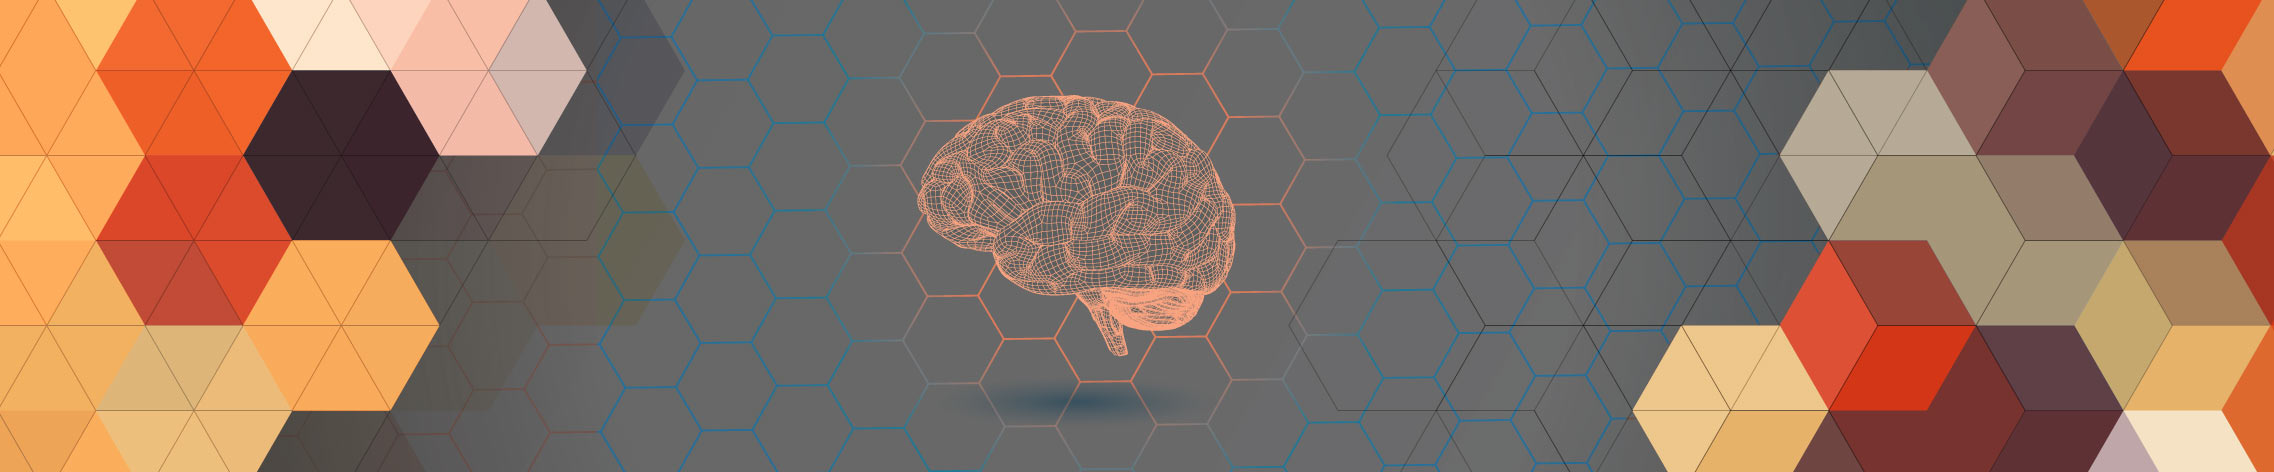 composition image of a polygonal brain flanked by hexagons shapes and colors